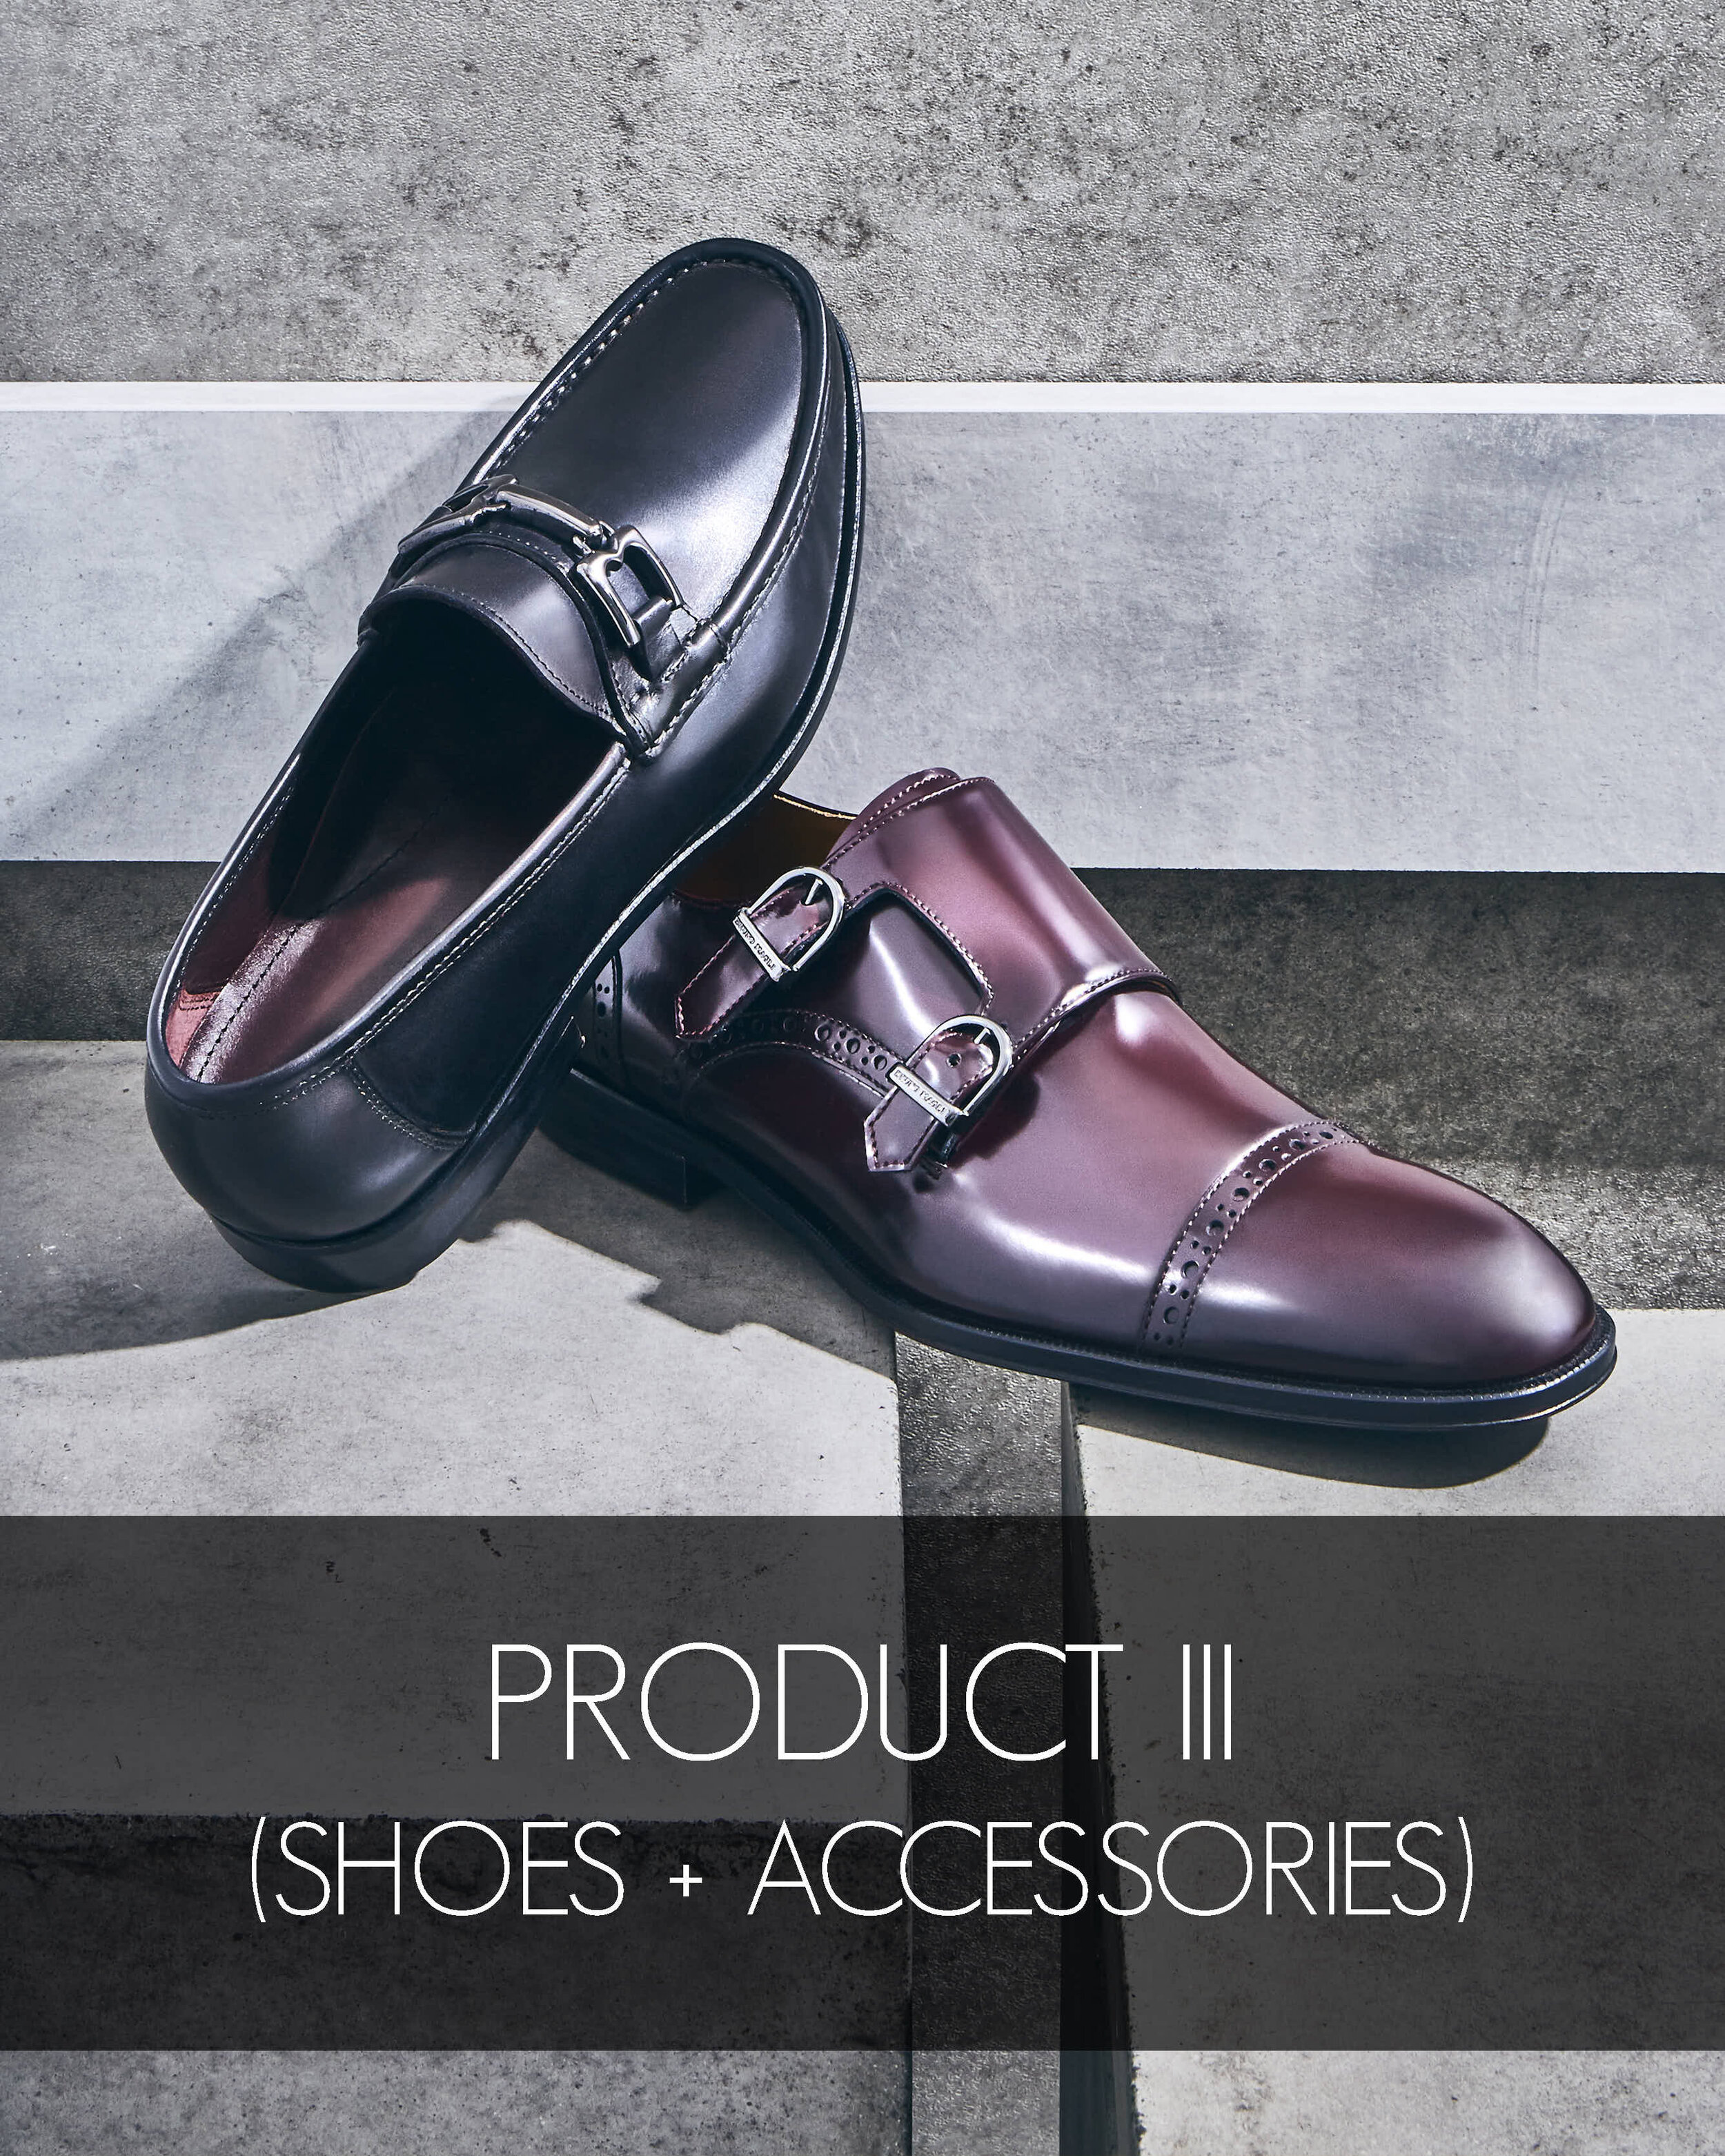 product iii (shoes + accessories) title card.jpg